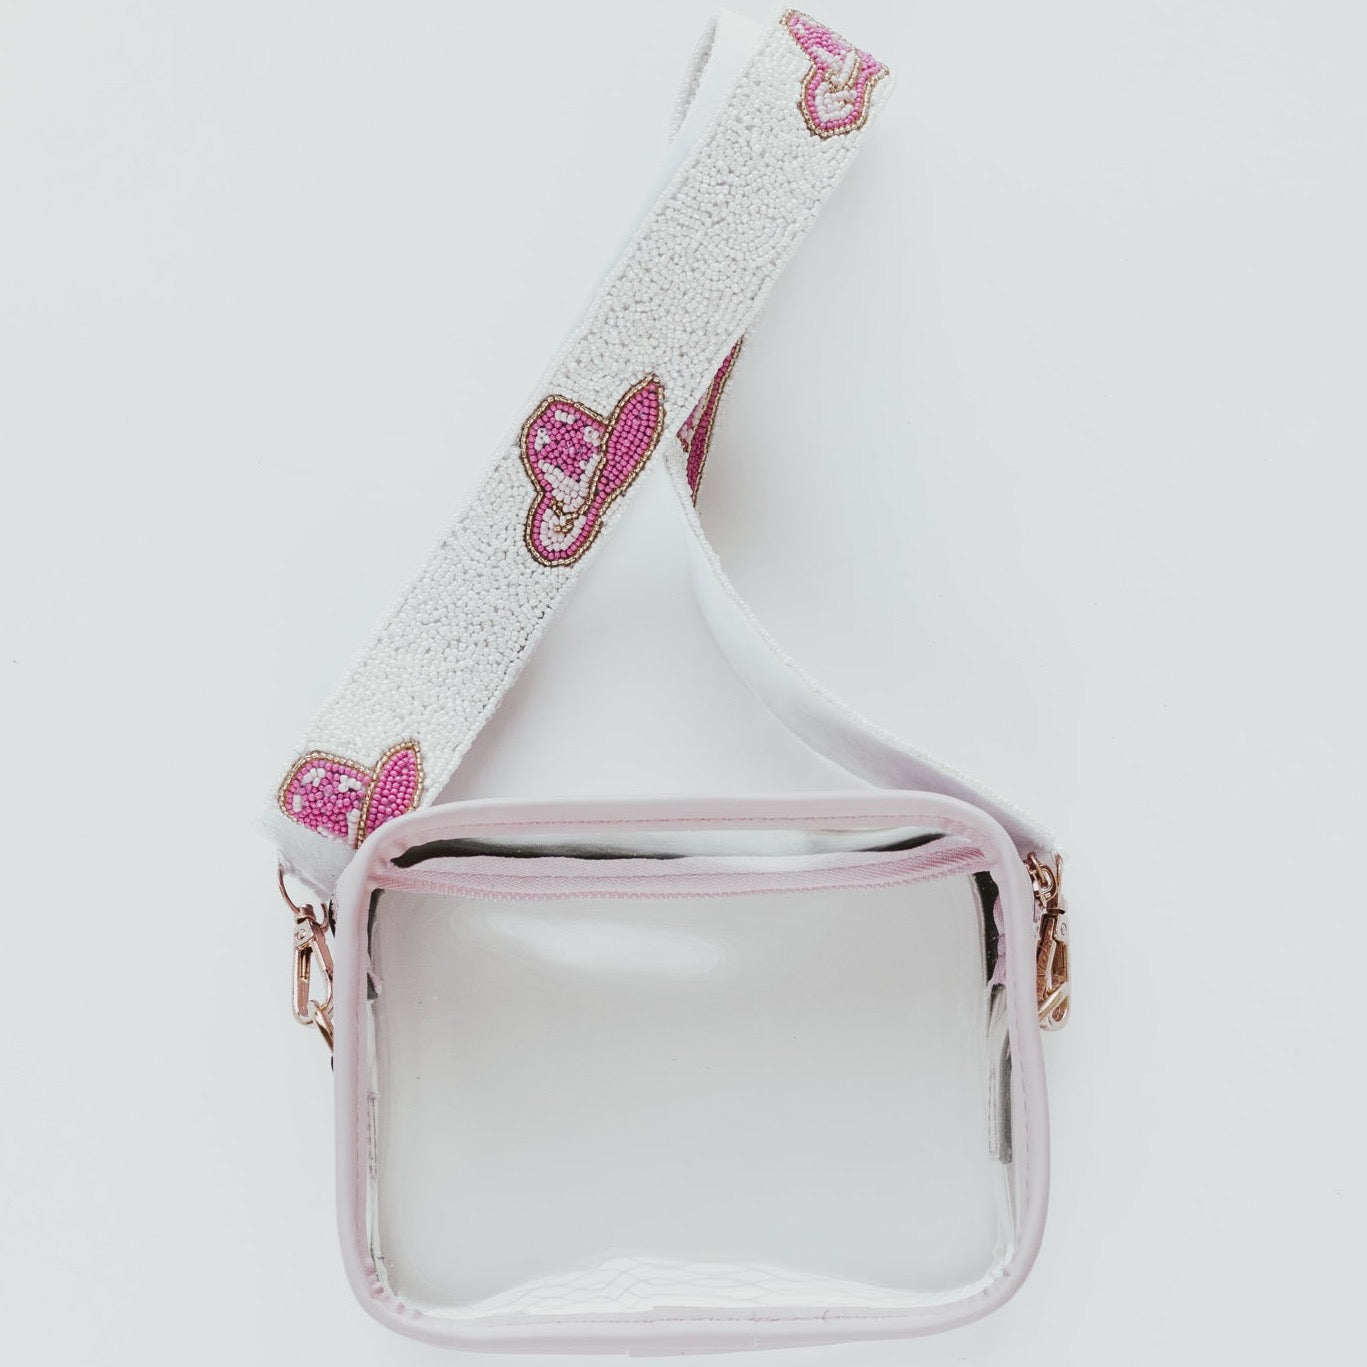 A clear purse with light pink lining and a white beaded bag strap with hot and light pink cowboy hats along the length of the strap against a white background